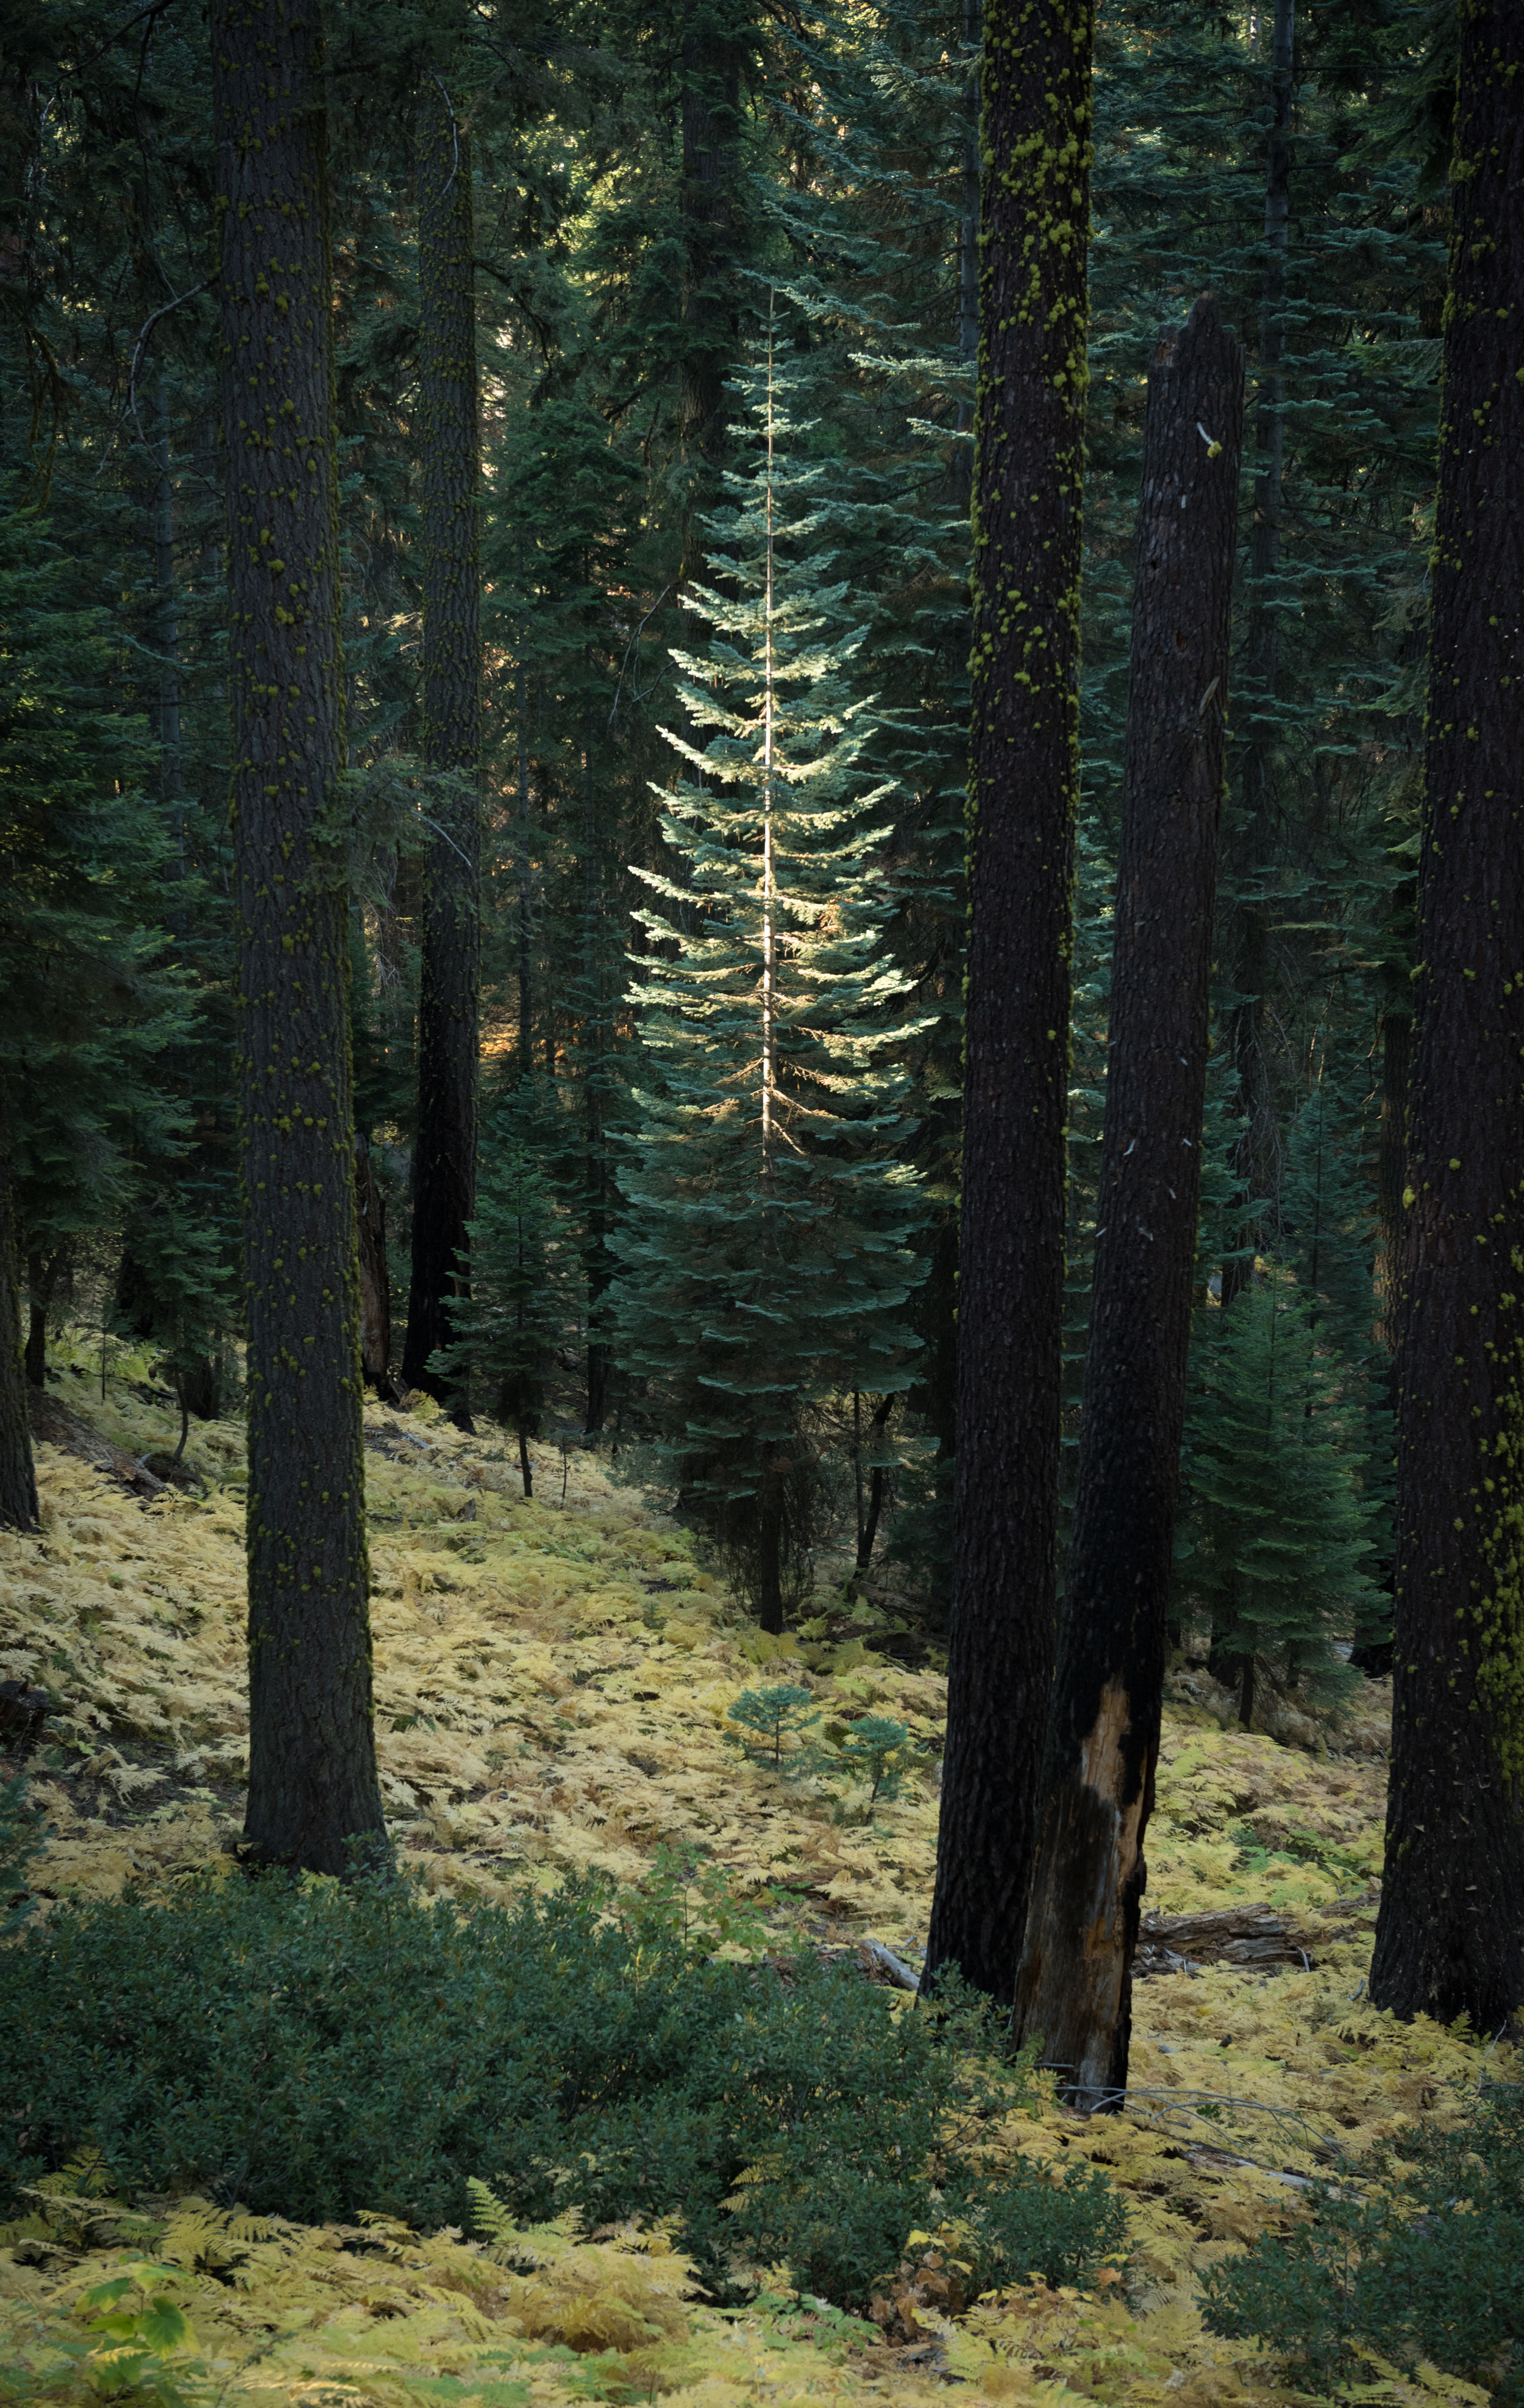   sequoia national park 4   8" x 11", 12" x 17" or 18" x 28"  2016     